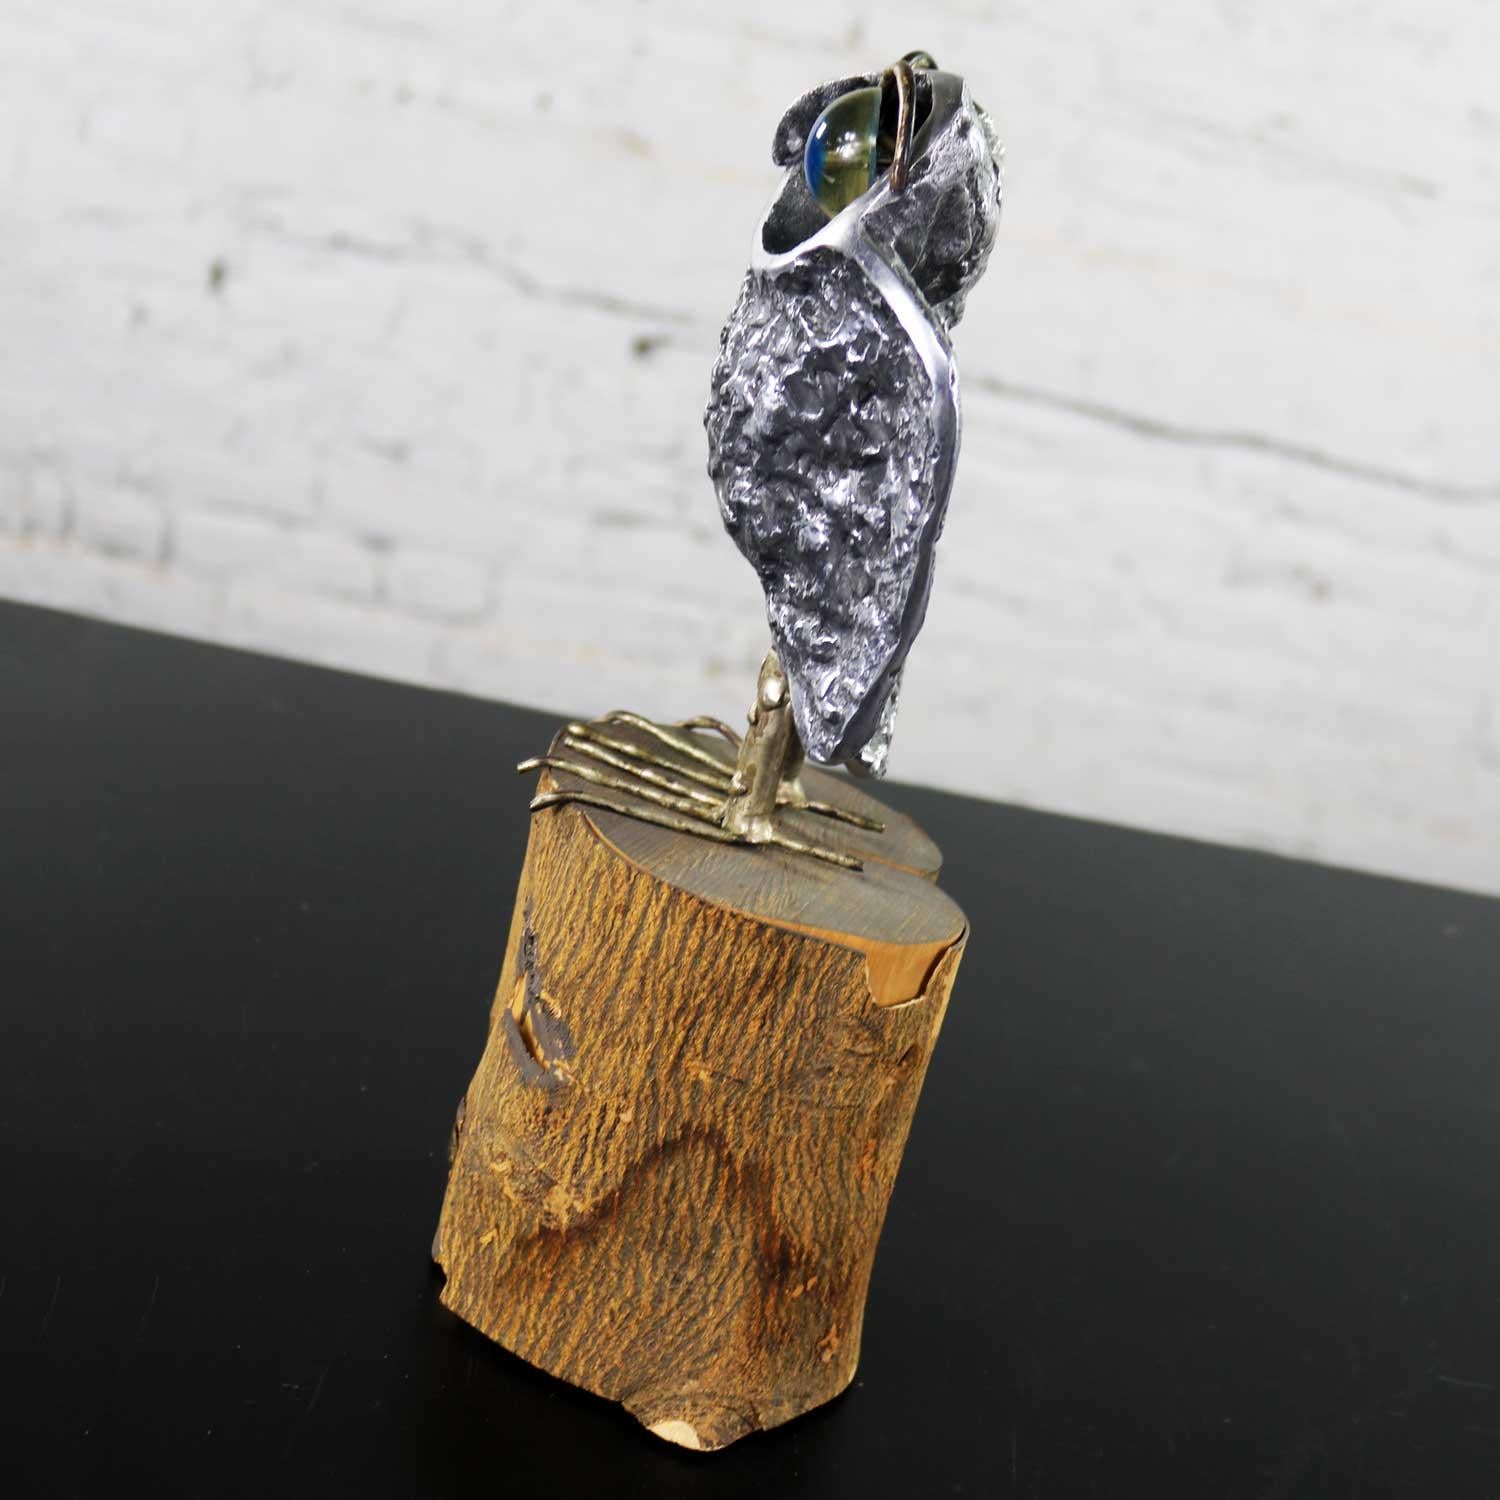 Acrylic Mid-Century Modern Owl Sculpture by Curtis Jere in Cast Aluminum on Wood Stump